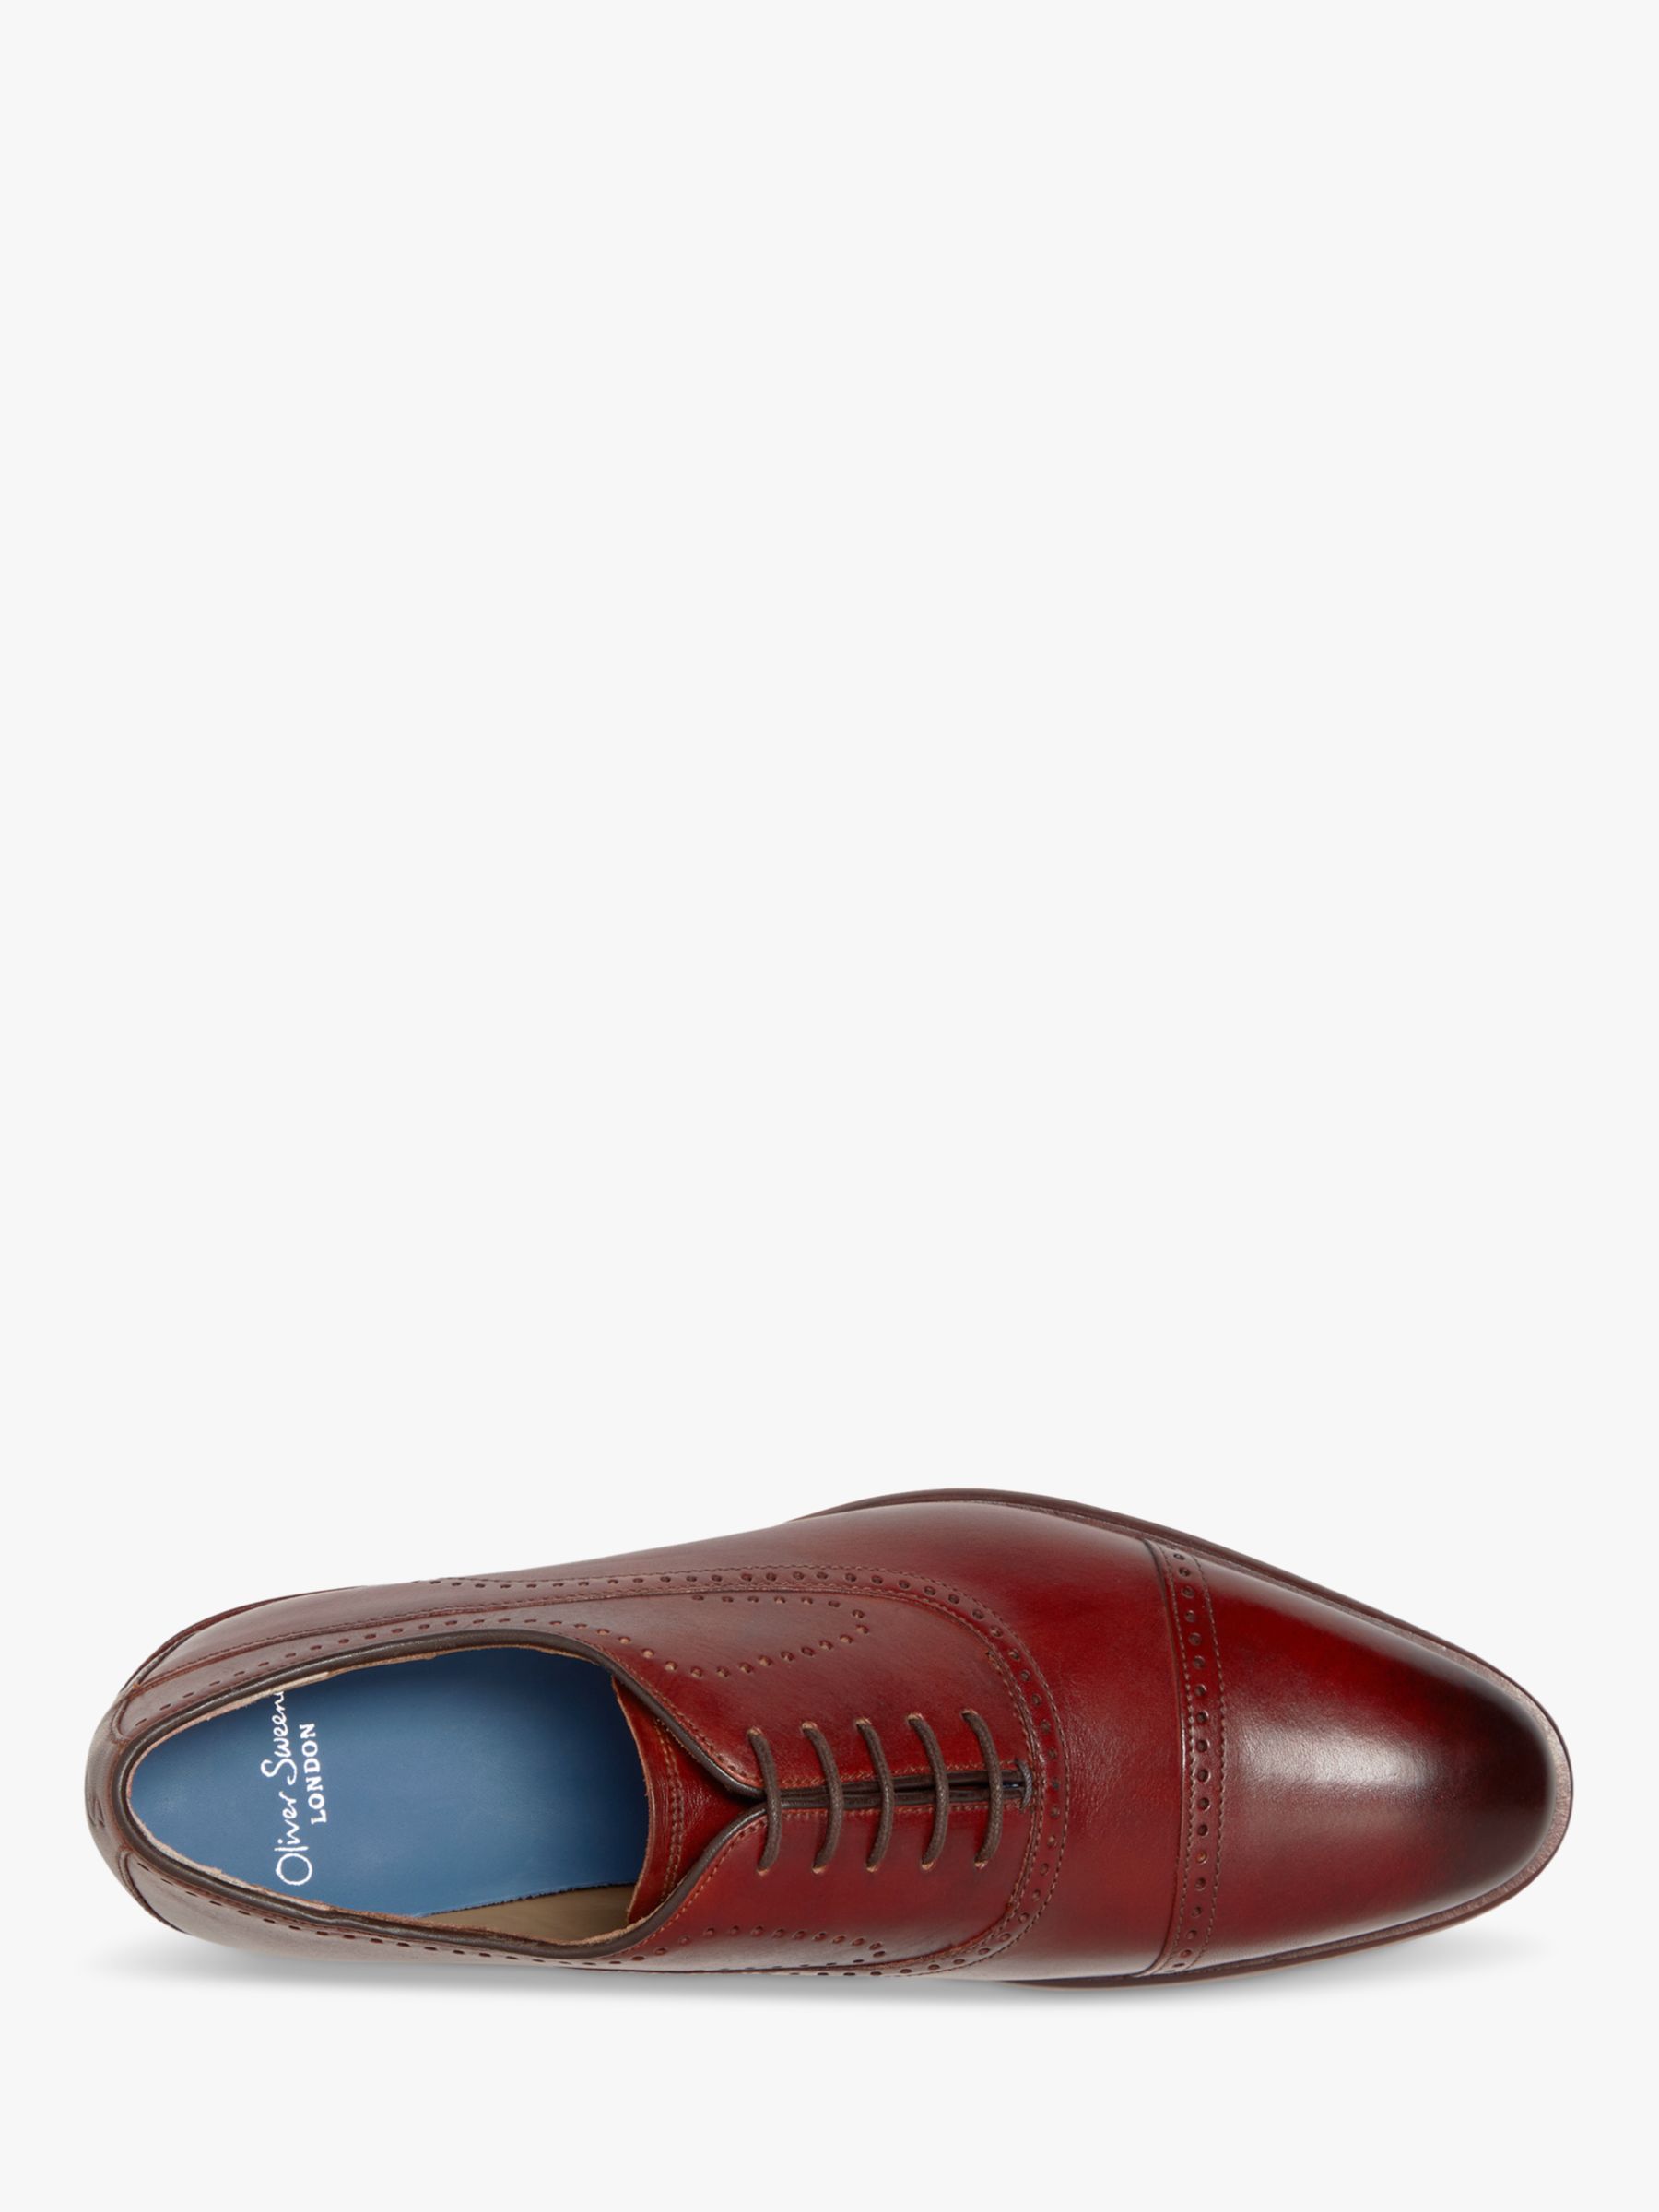 Oliver Sweeney Mallory Oxford Shoes, Tan, 7